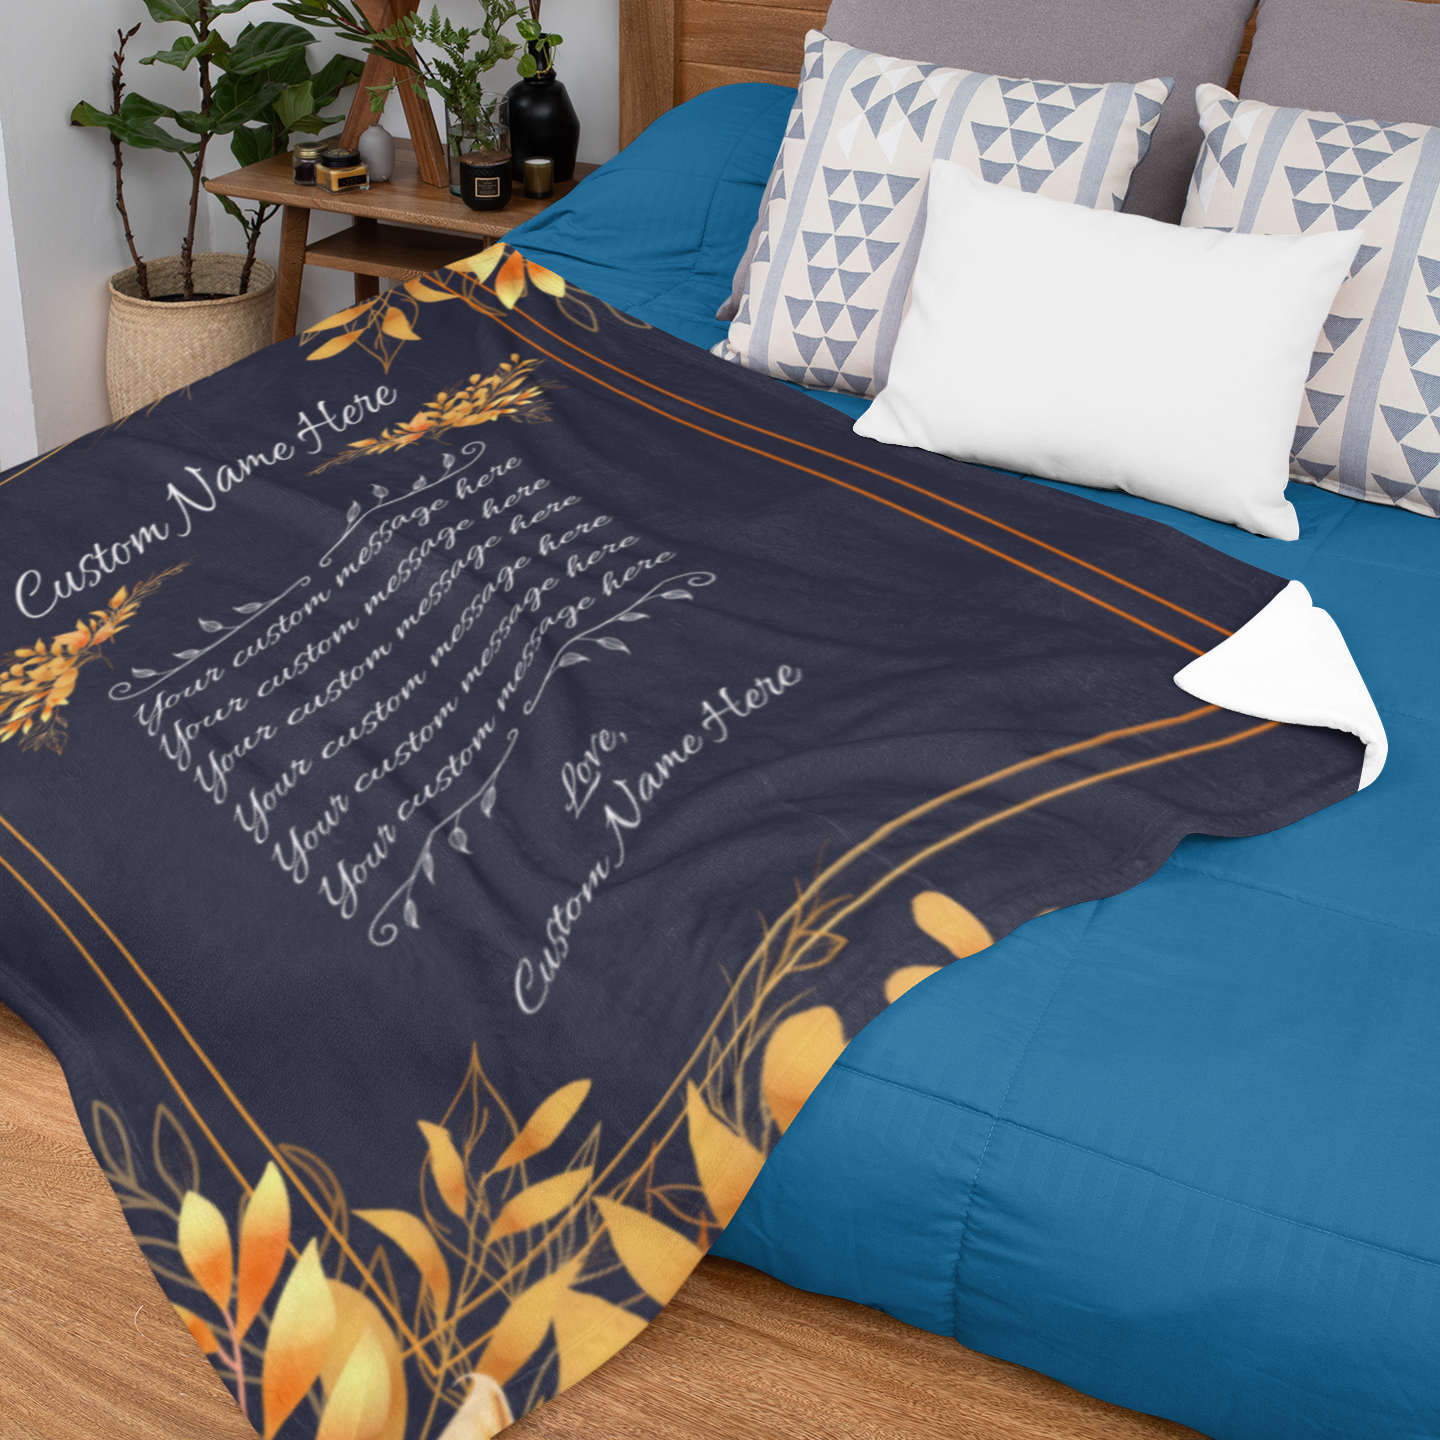 Gift Blanket Mother Daughter, Gifts Mothers Birthday